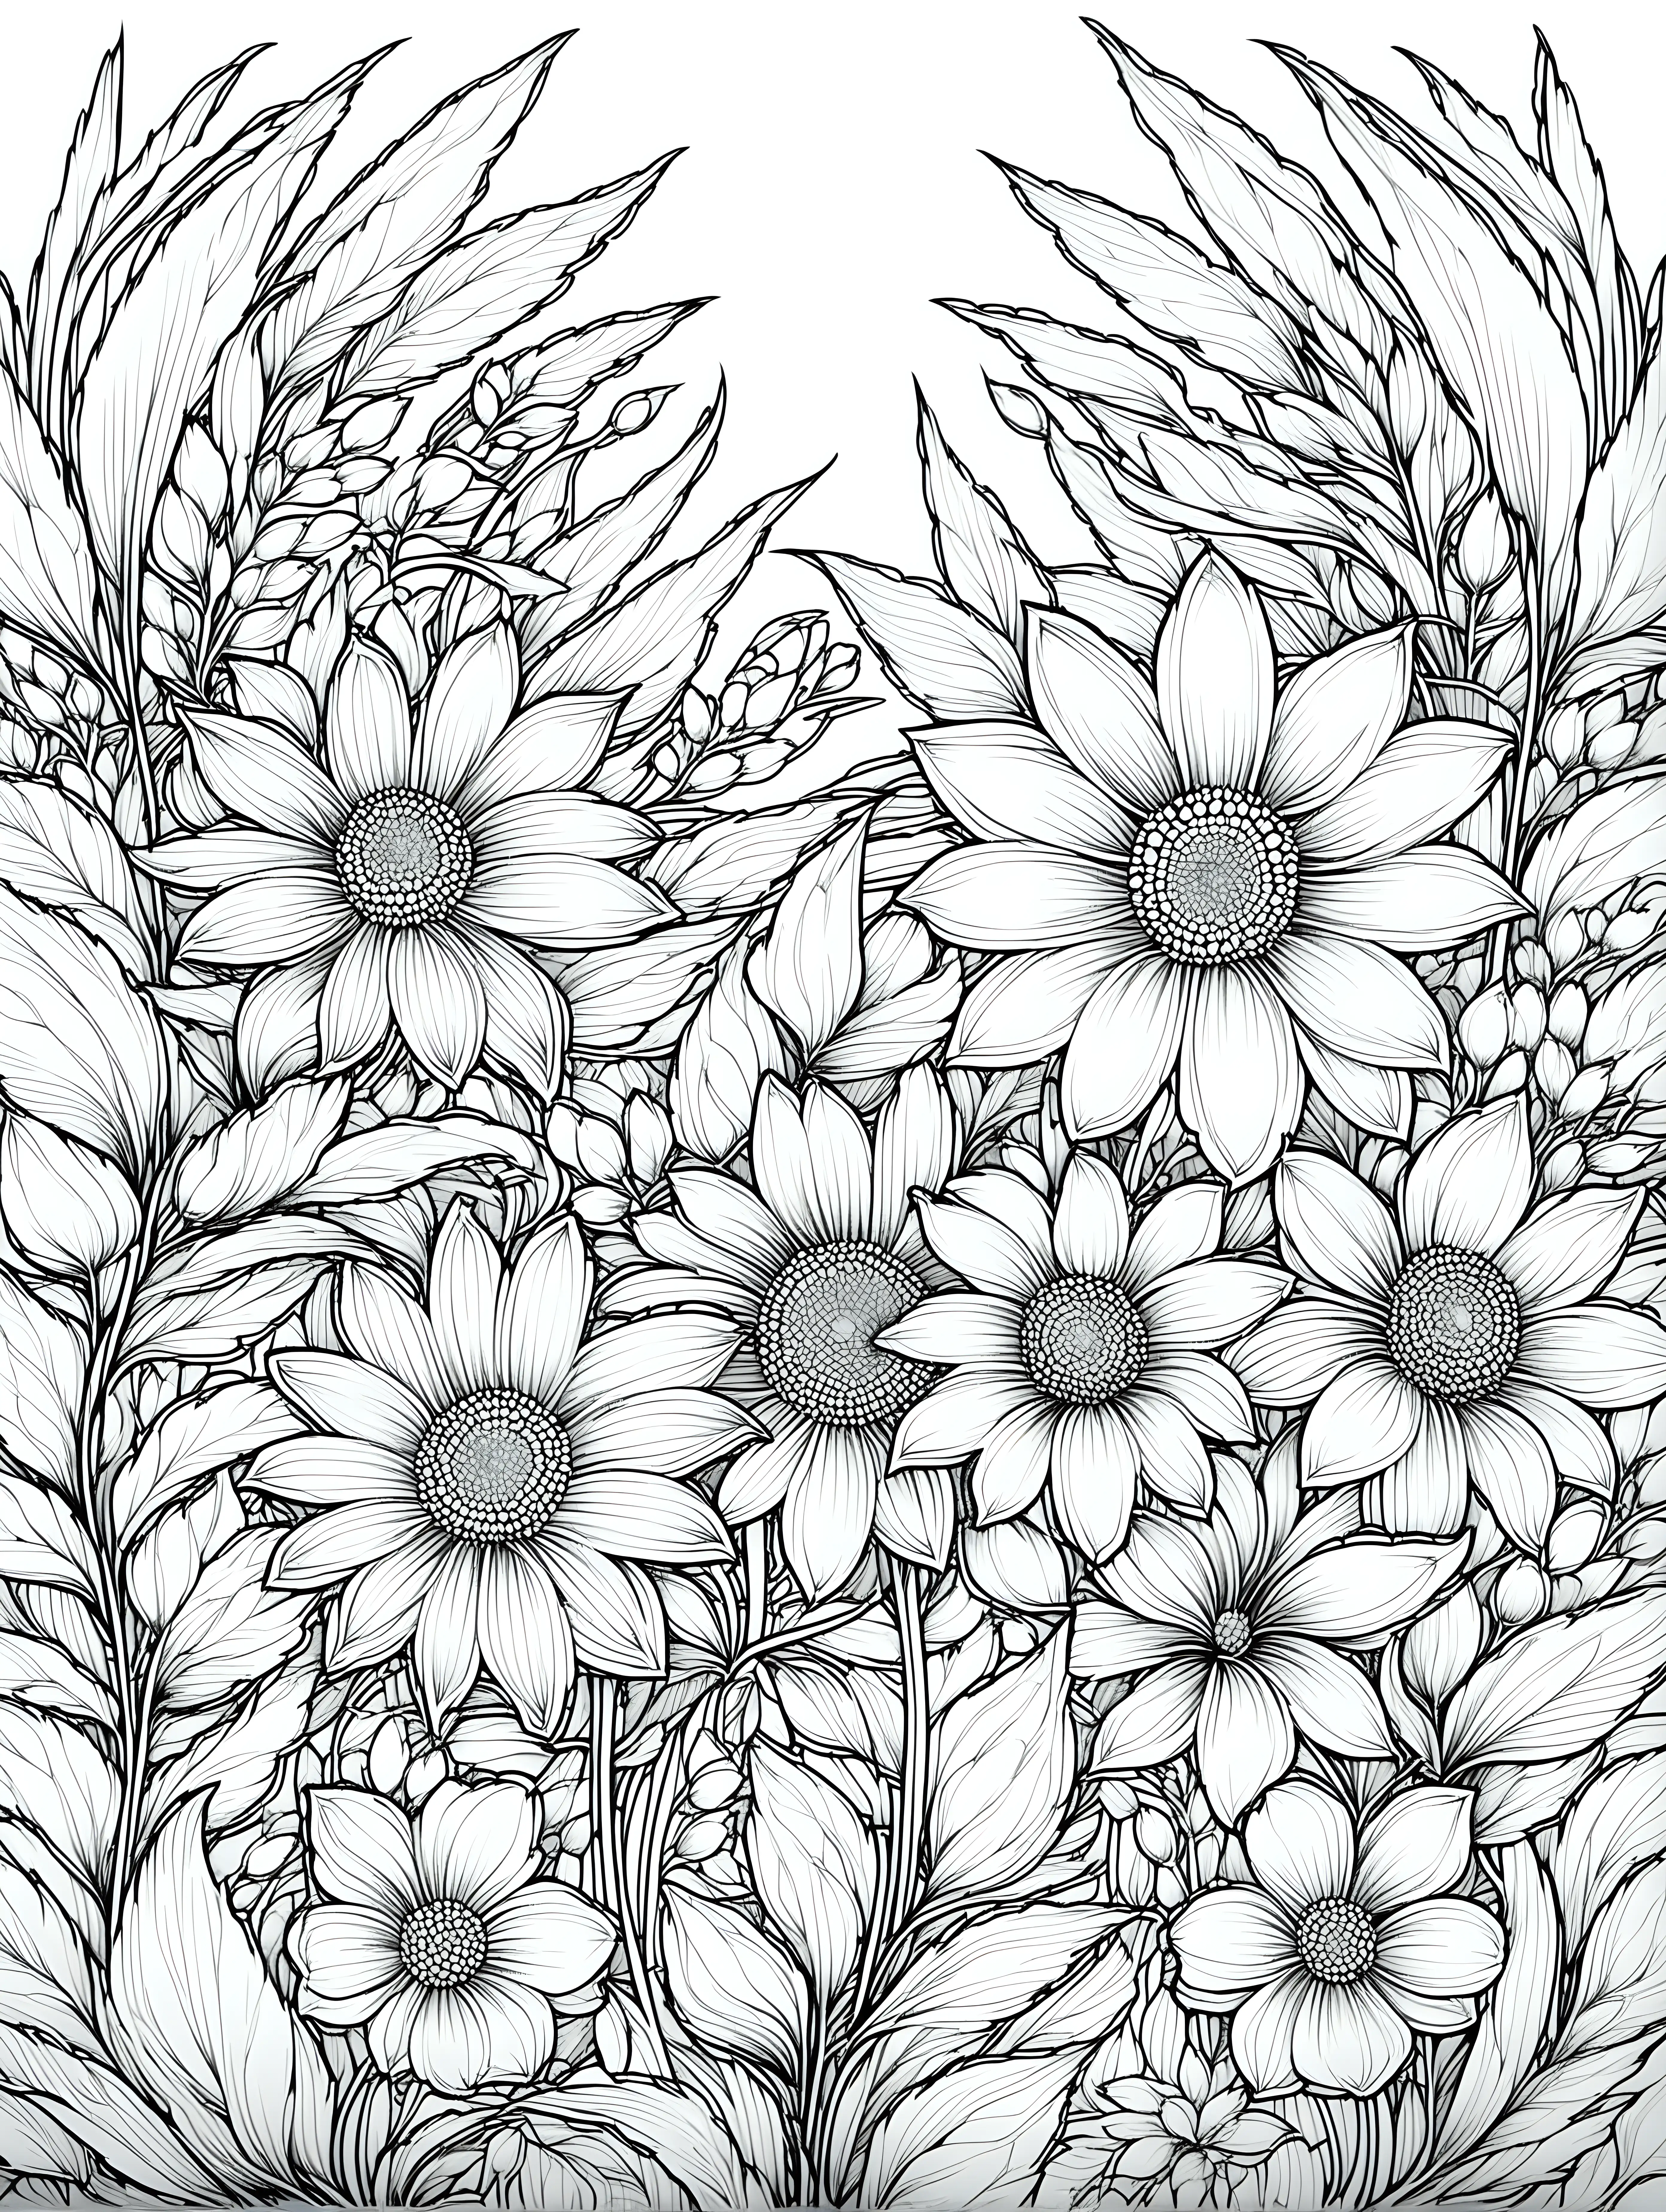 Monochrome Enchantment Black and White Fantasy Flower Coloring Page with Delicate Lines